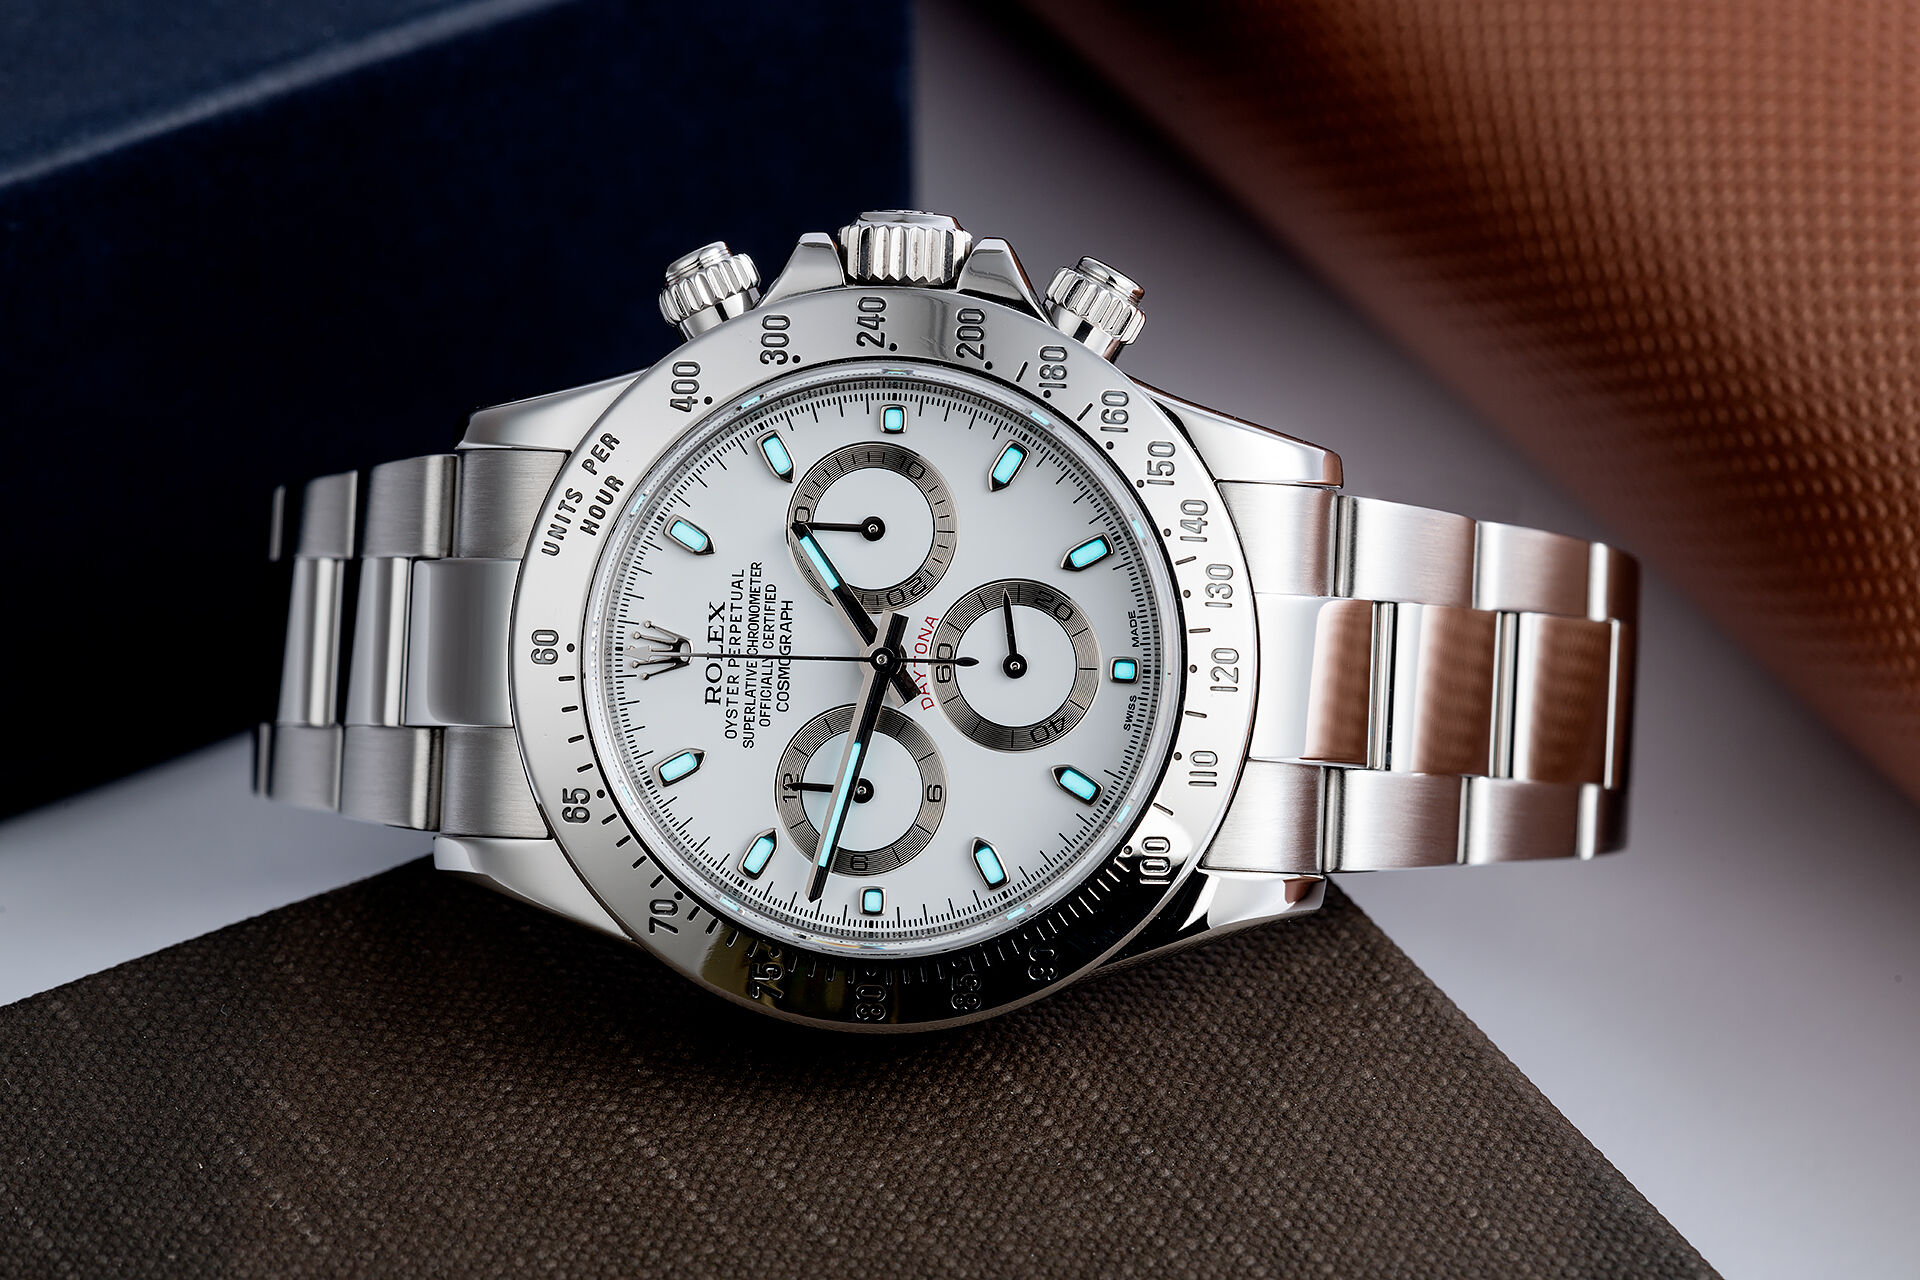 ref 116520 | Late Model - Box and Papers | Rolex Cosmograph Daytona